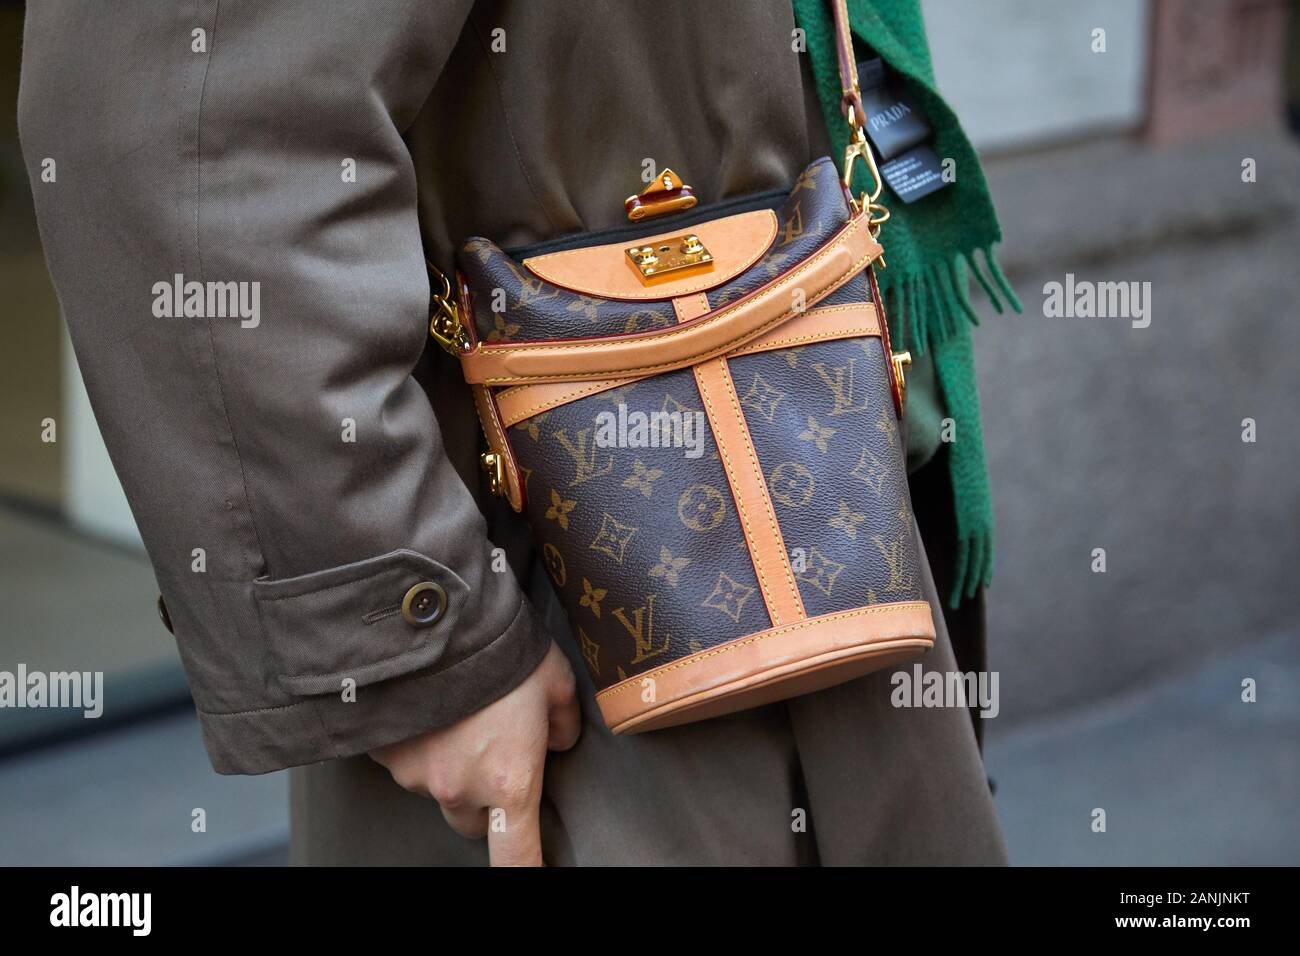 Louis Vuitton Paris Menswear S S Cropped hand holding brown leather bag  with short handles Stock Photo - Alamy